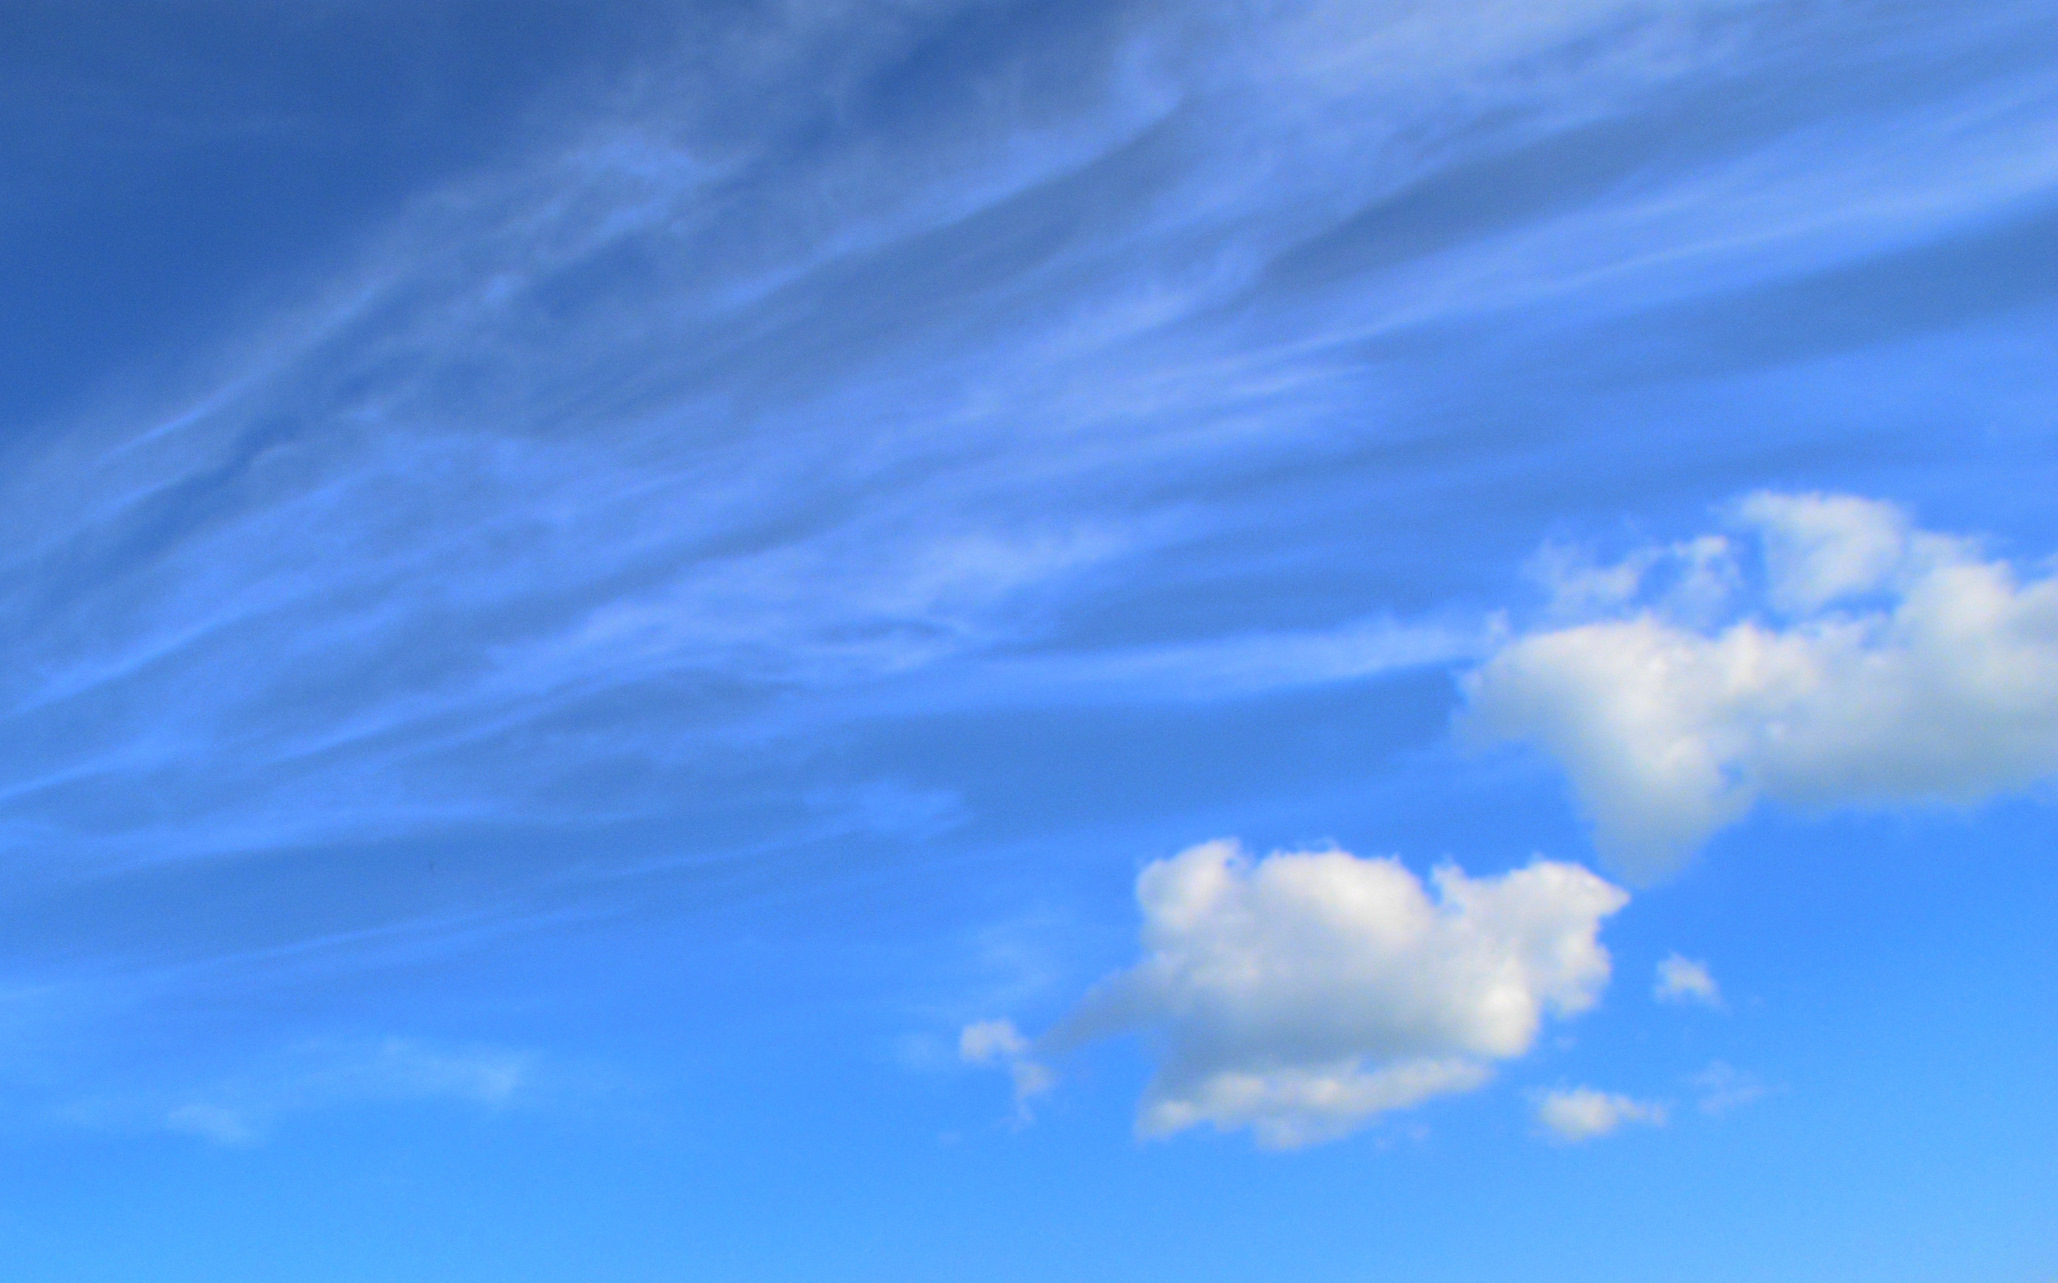 Blue Sky, Air, Backgrounds, Blue, Bright, HQ Photo